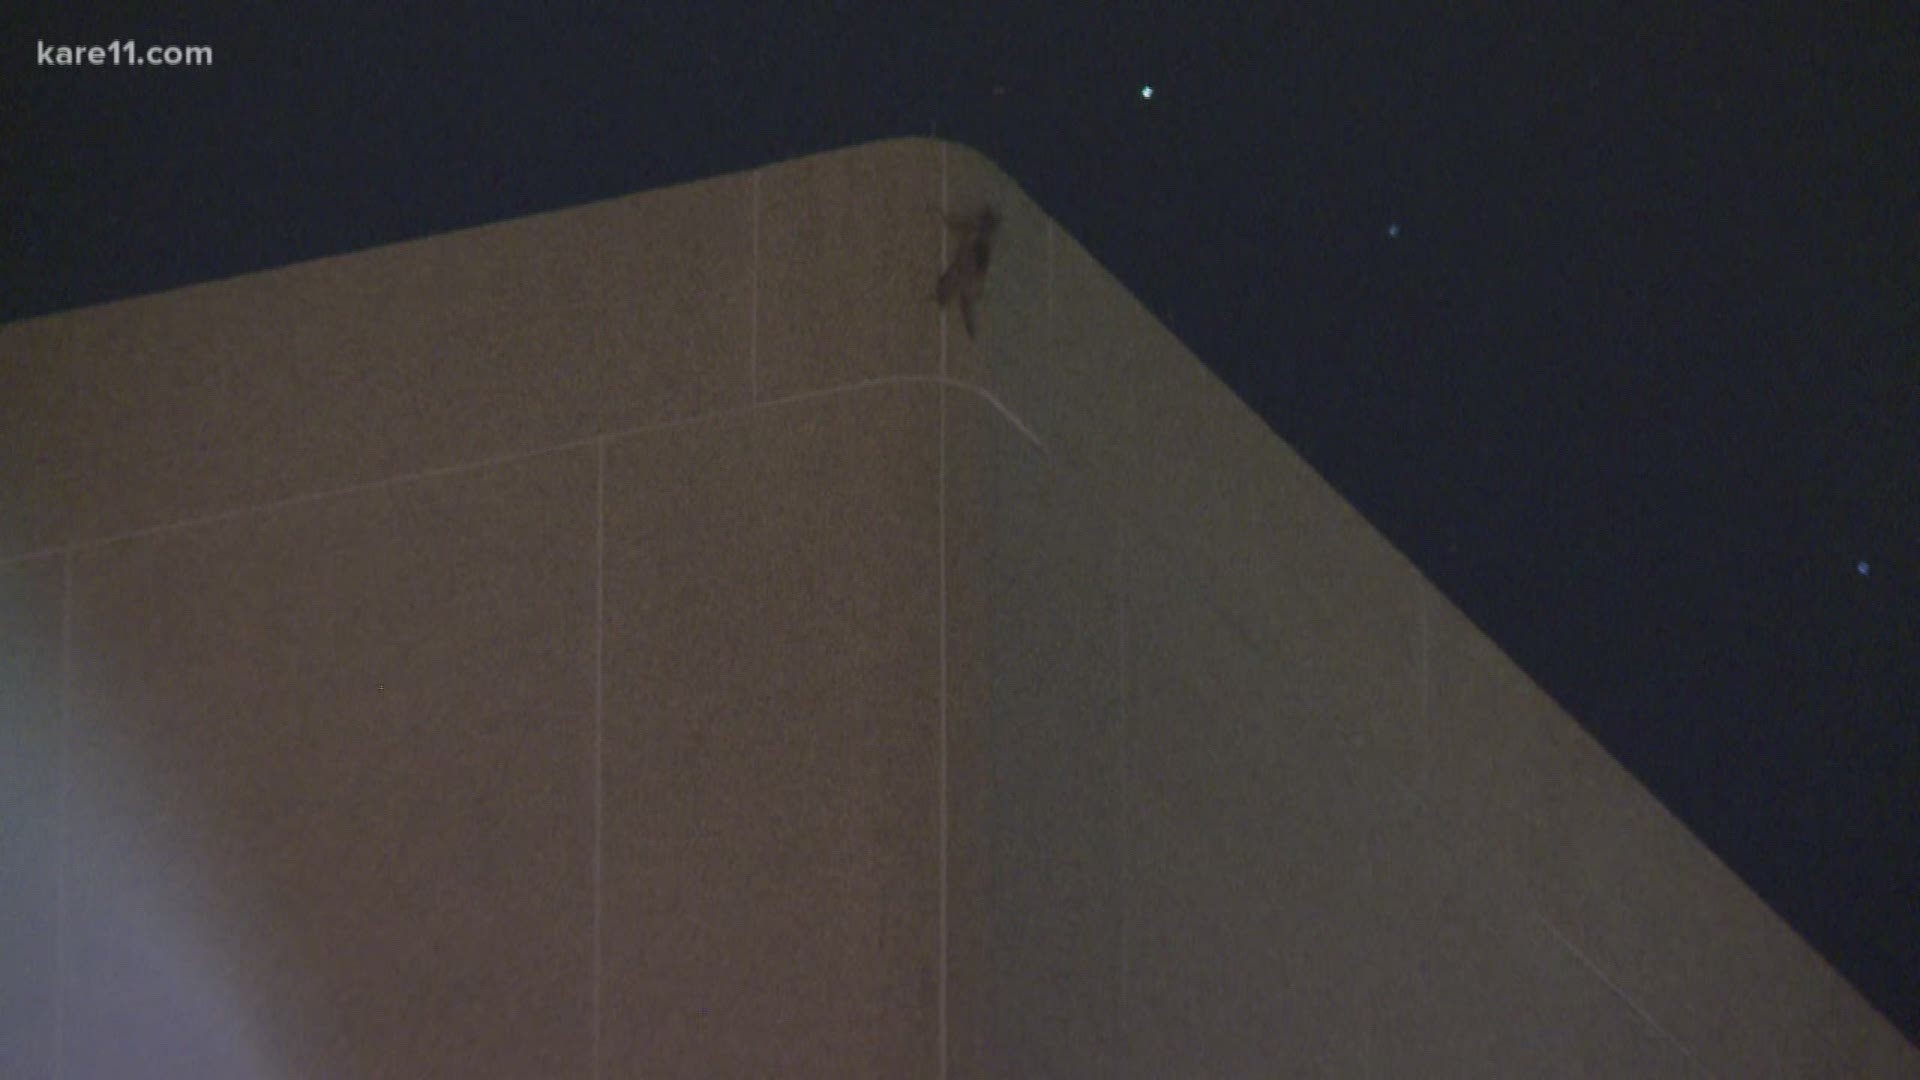 #MPRraccoon has been removed from the roof of the UBS building in downtown St. Paul and will be released into the wild according to wildlife officials. https://kare11.tv/2LIlAVS� Subscribe to KARE 11: https://www.youtube.com/subscription_center?add_user